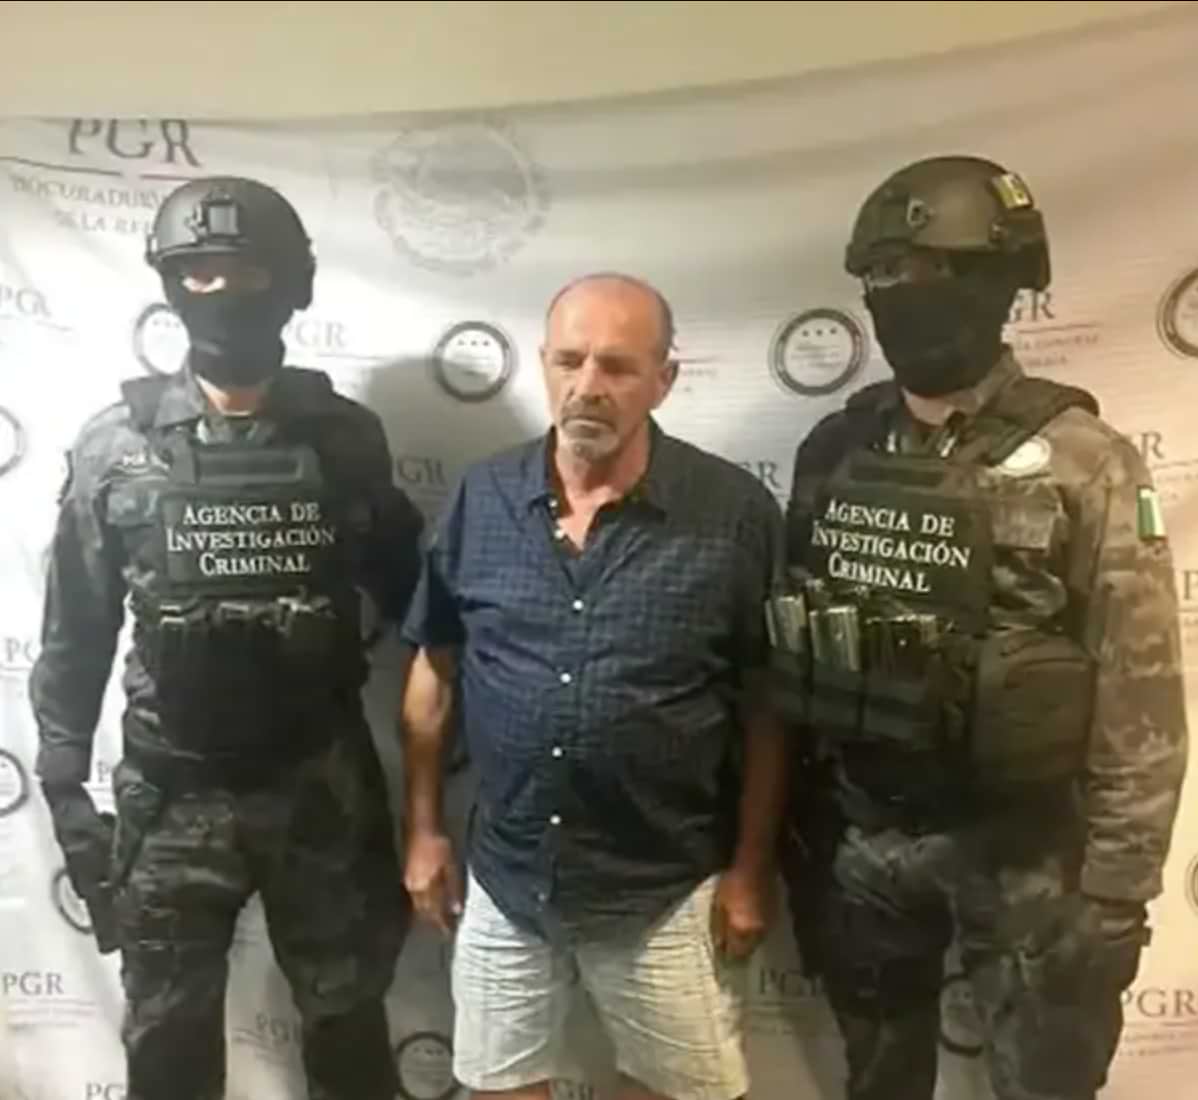 Giulio Perrone, who has been wanted in connection to drug trafficking, in custody in Mexico in March. Mexican attorney general/Univision